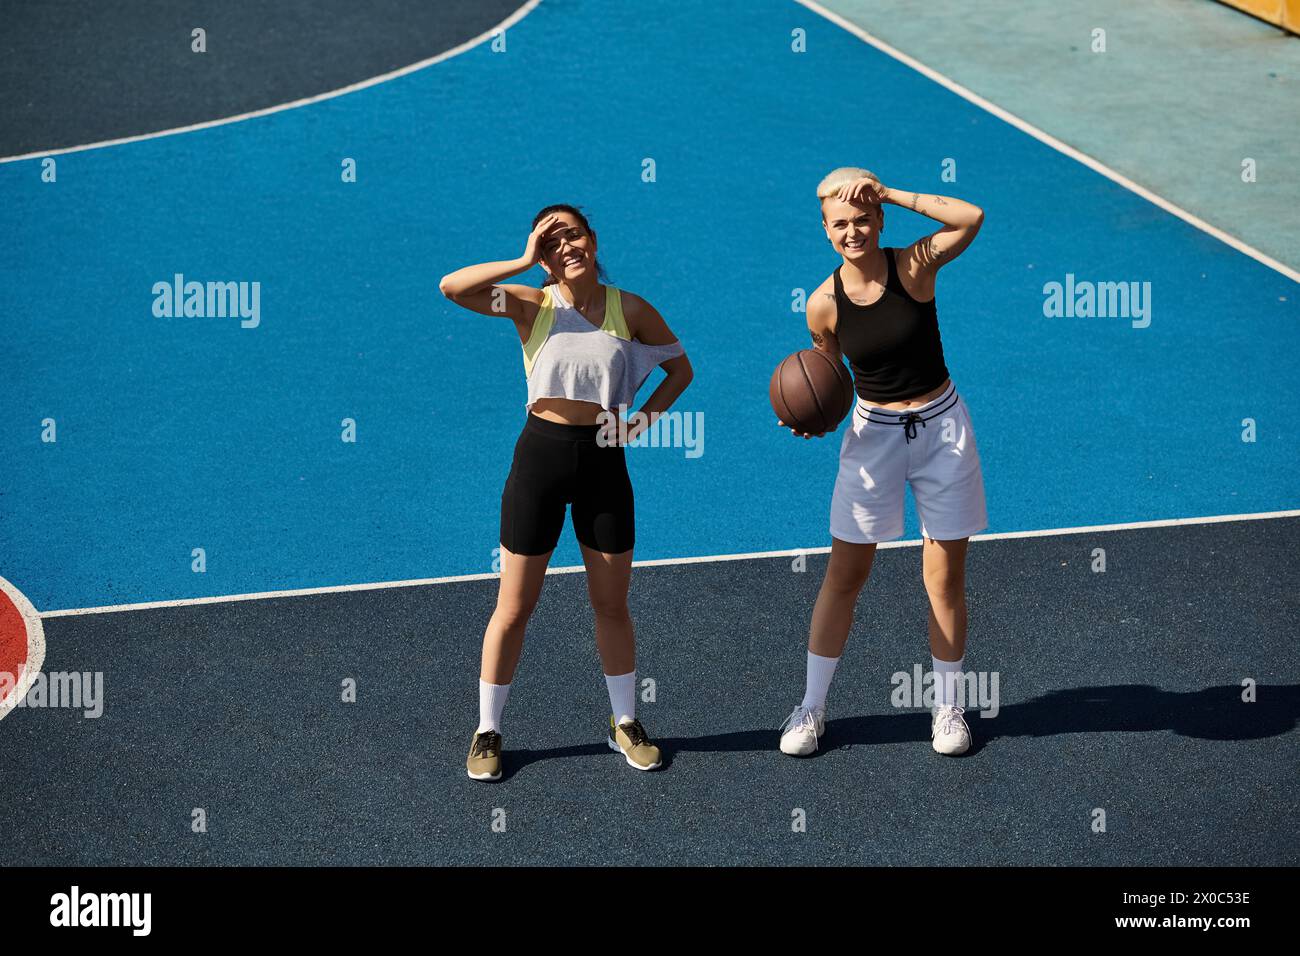 Two athletic women stand proudly atop a basketball court, embodying strength and friendship in the summer sun. Stock Photo